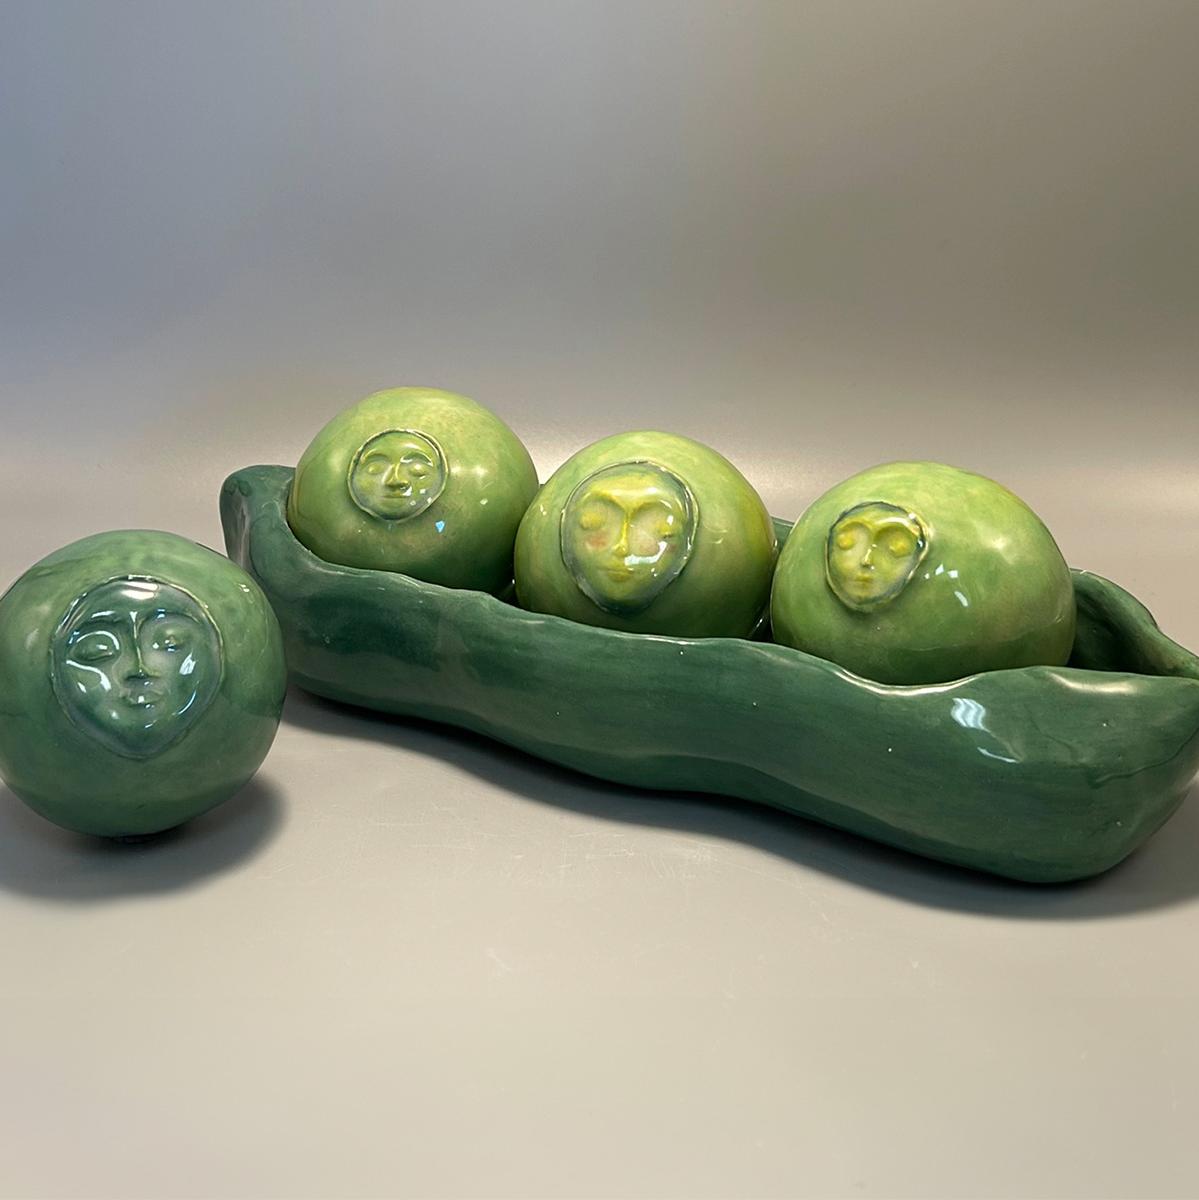 Sculpture of four green peas in a pod